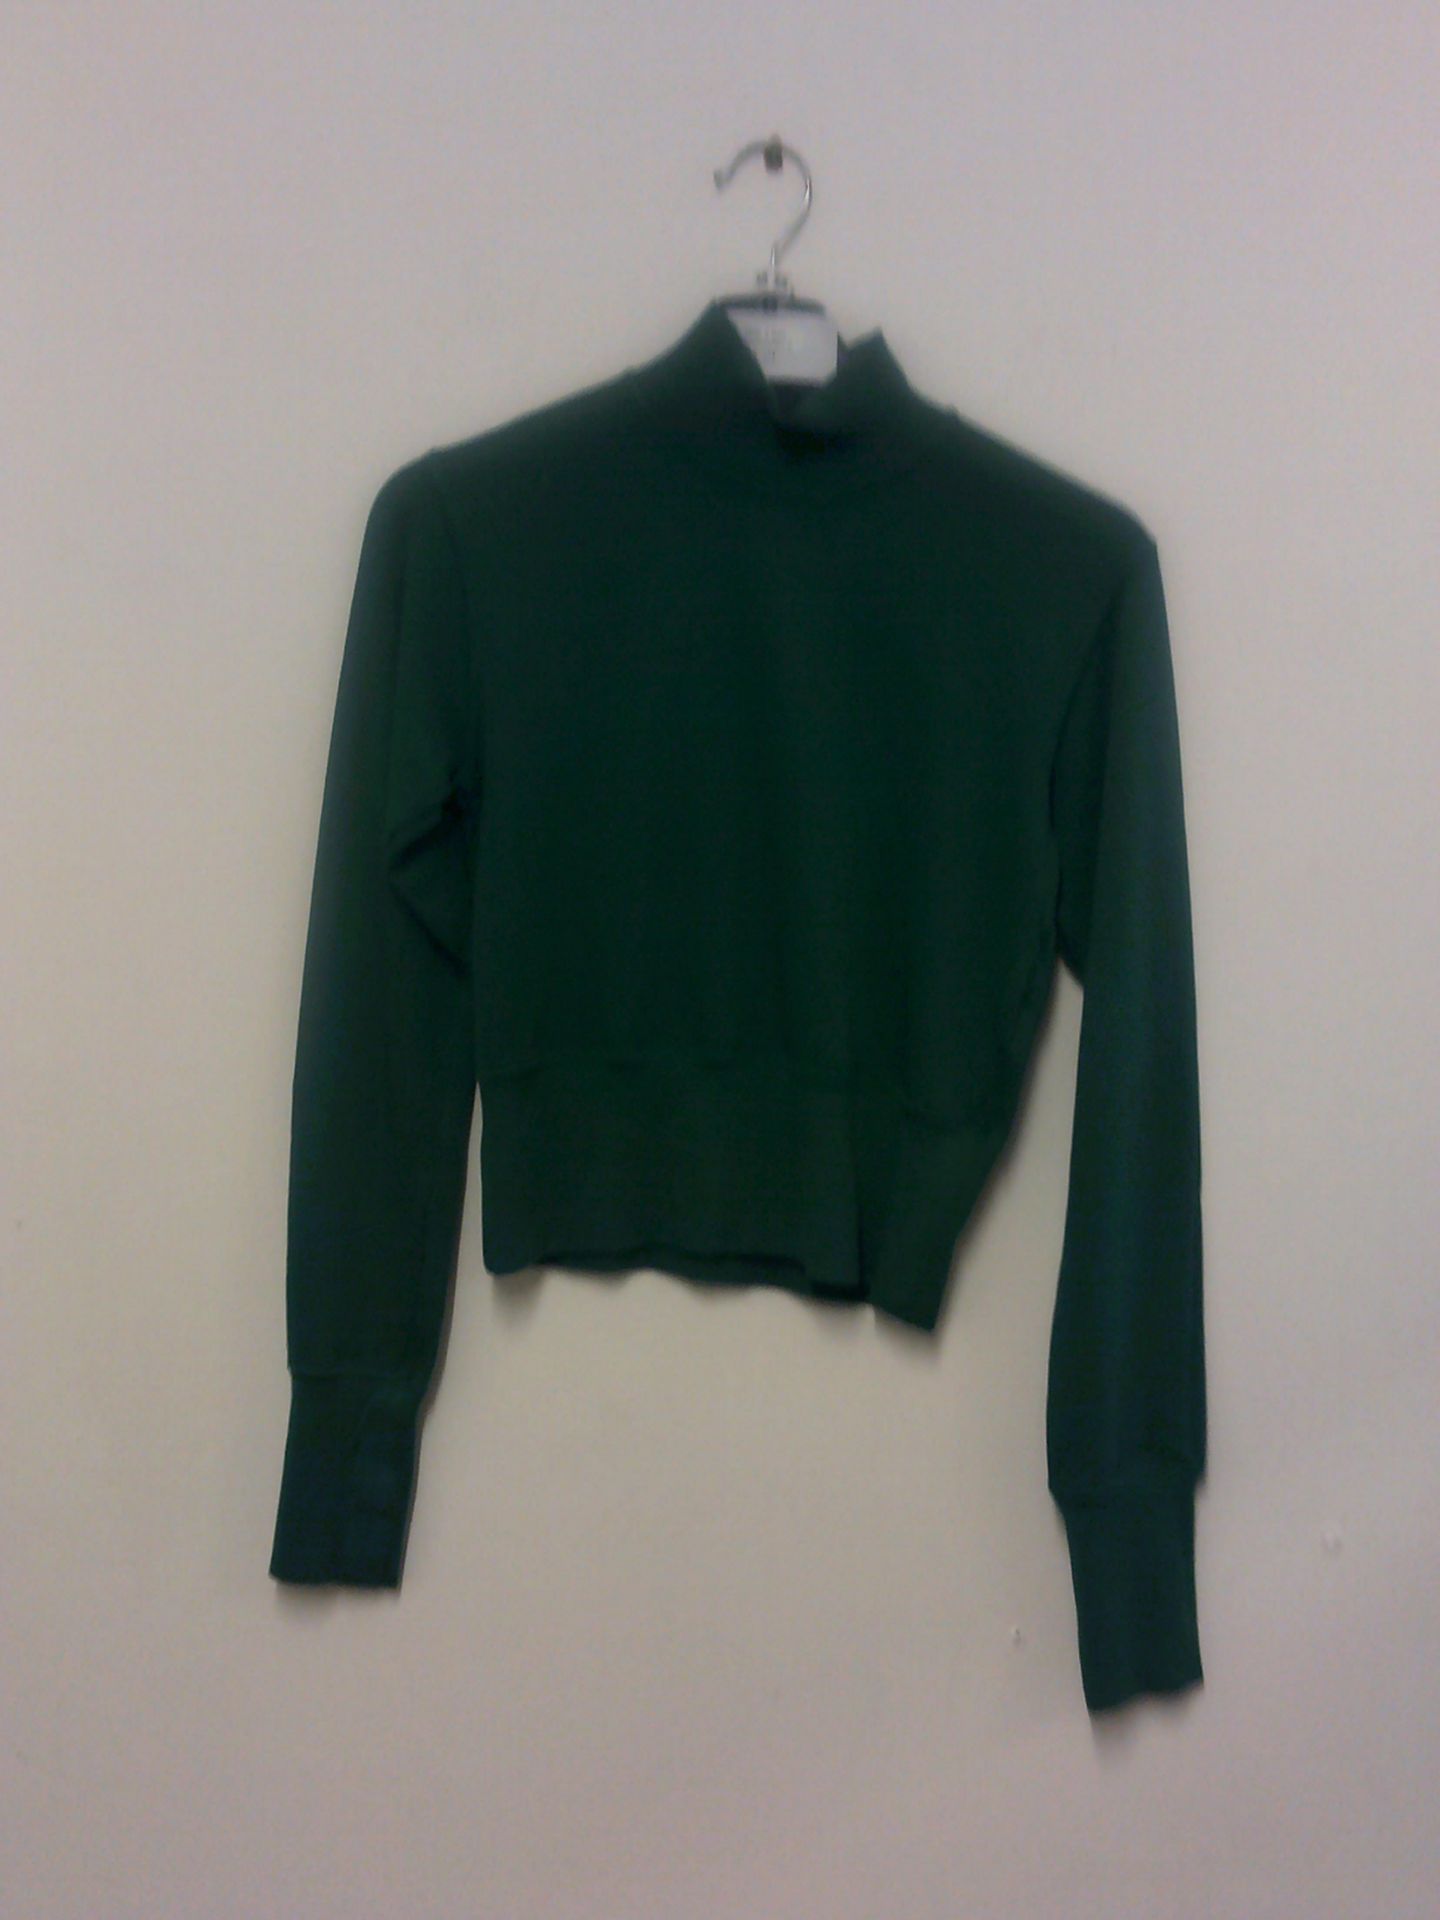 GREEN CROPPED TOP SIZE XS